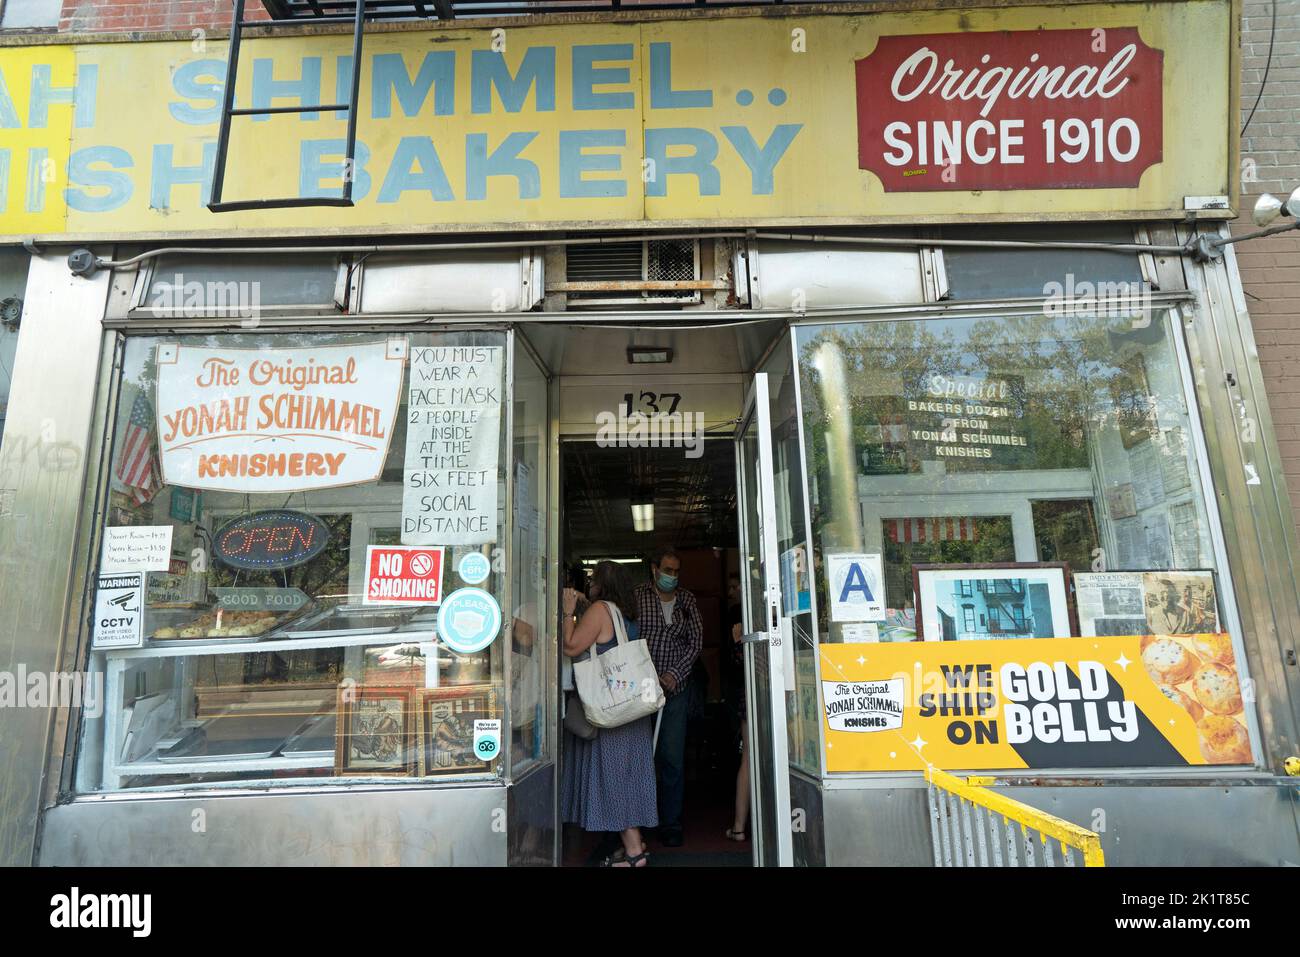 The Yonah Schimmel knish bakery has been at 137 East Houston St. on Manhattan's Lower East Side since 1910 when the area was crowded with immigrants. Stock Photo